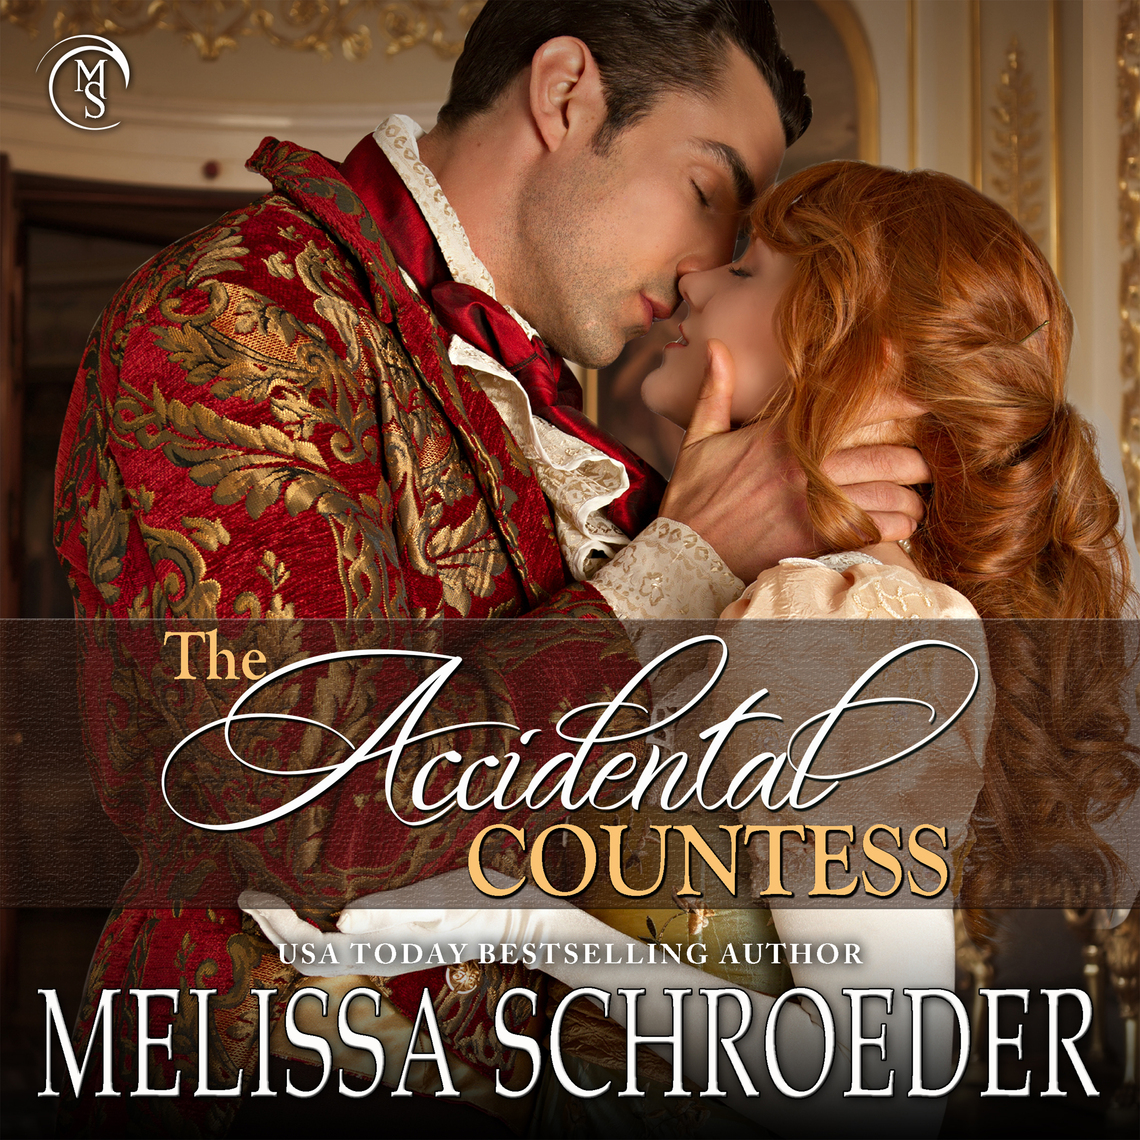 The Accidental Countess by Melissa Schroeder image